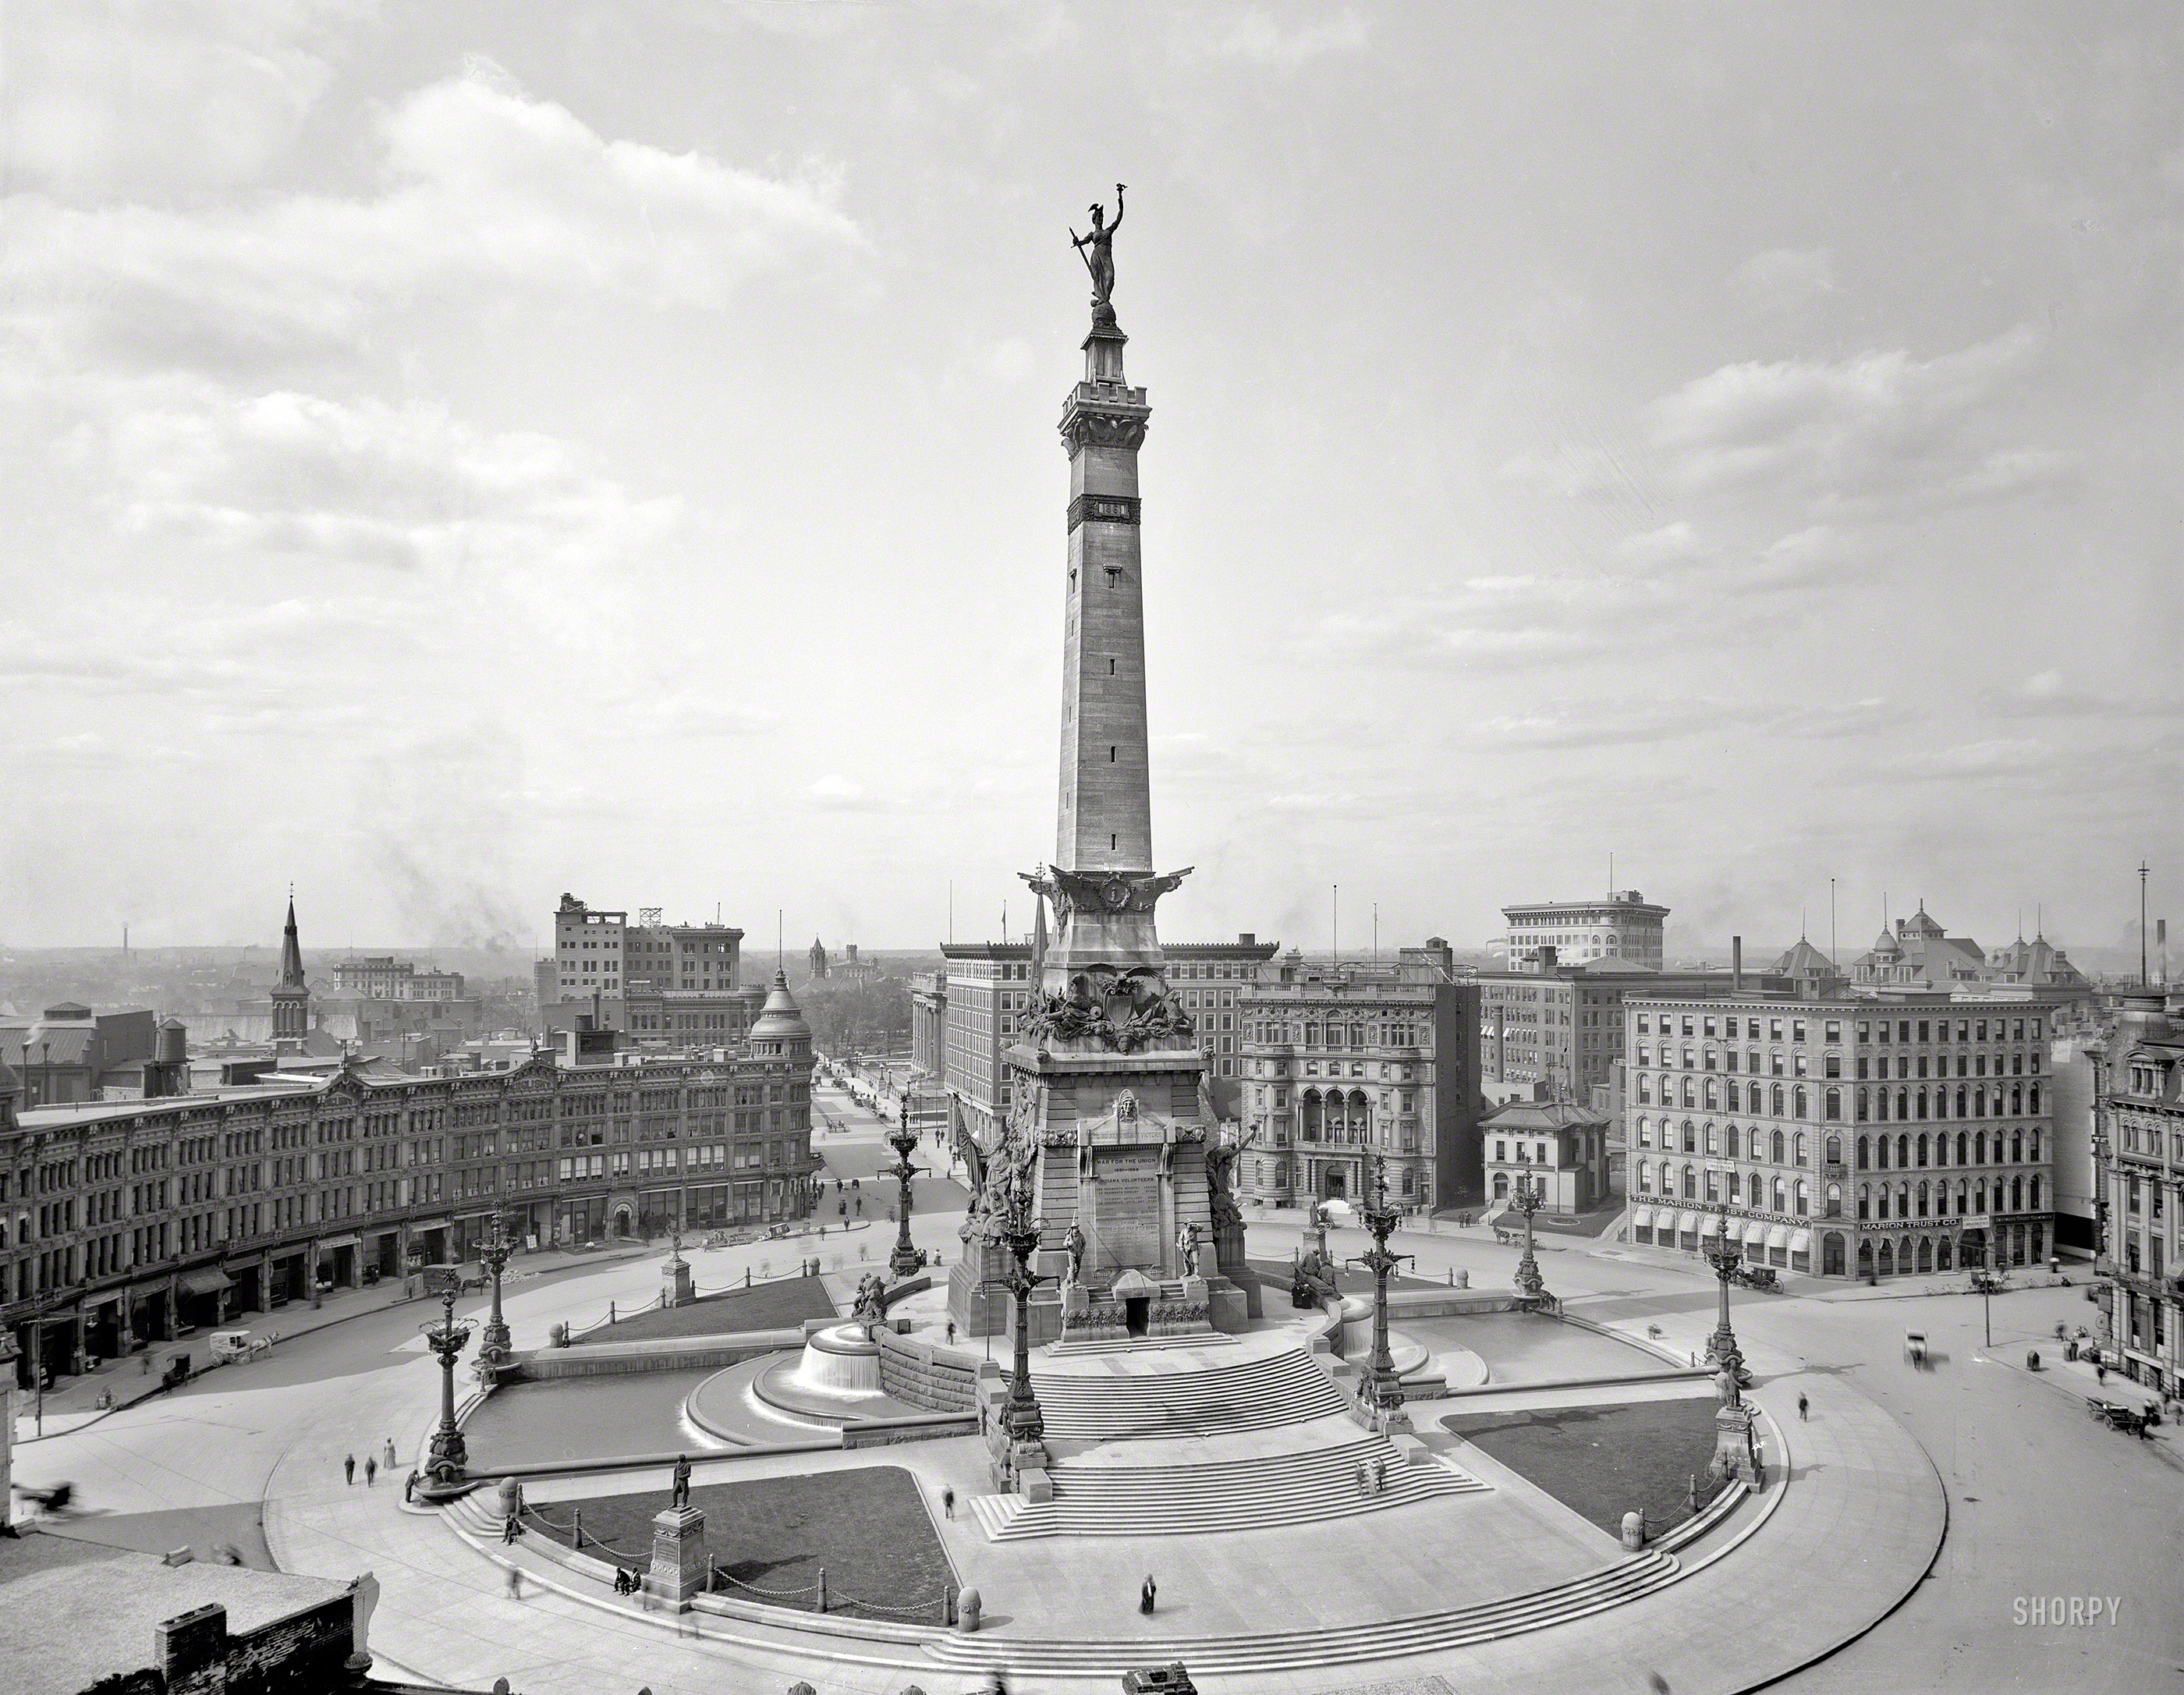 Indianapolis, Indiana, circa 1907. "Soldiers' and Sailors' Monument." 8x10 inch dry plate glass negative, Detroit Publishing Company. View full size.